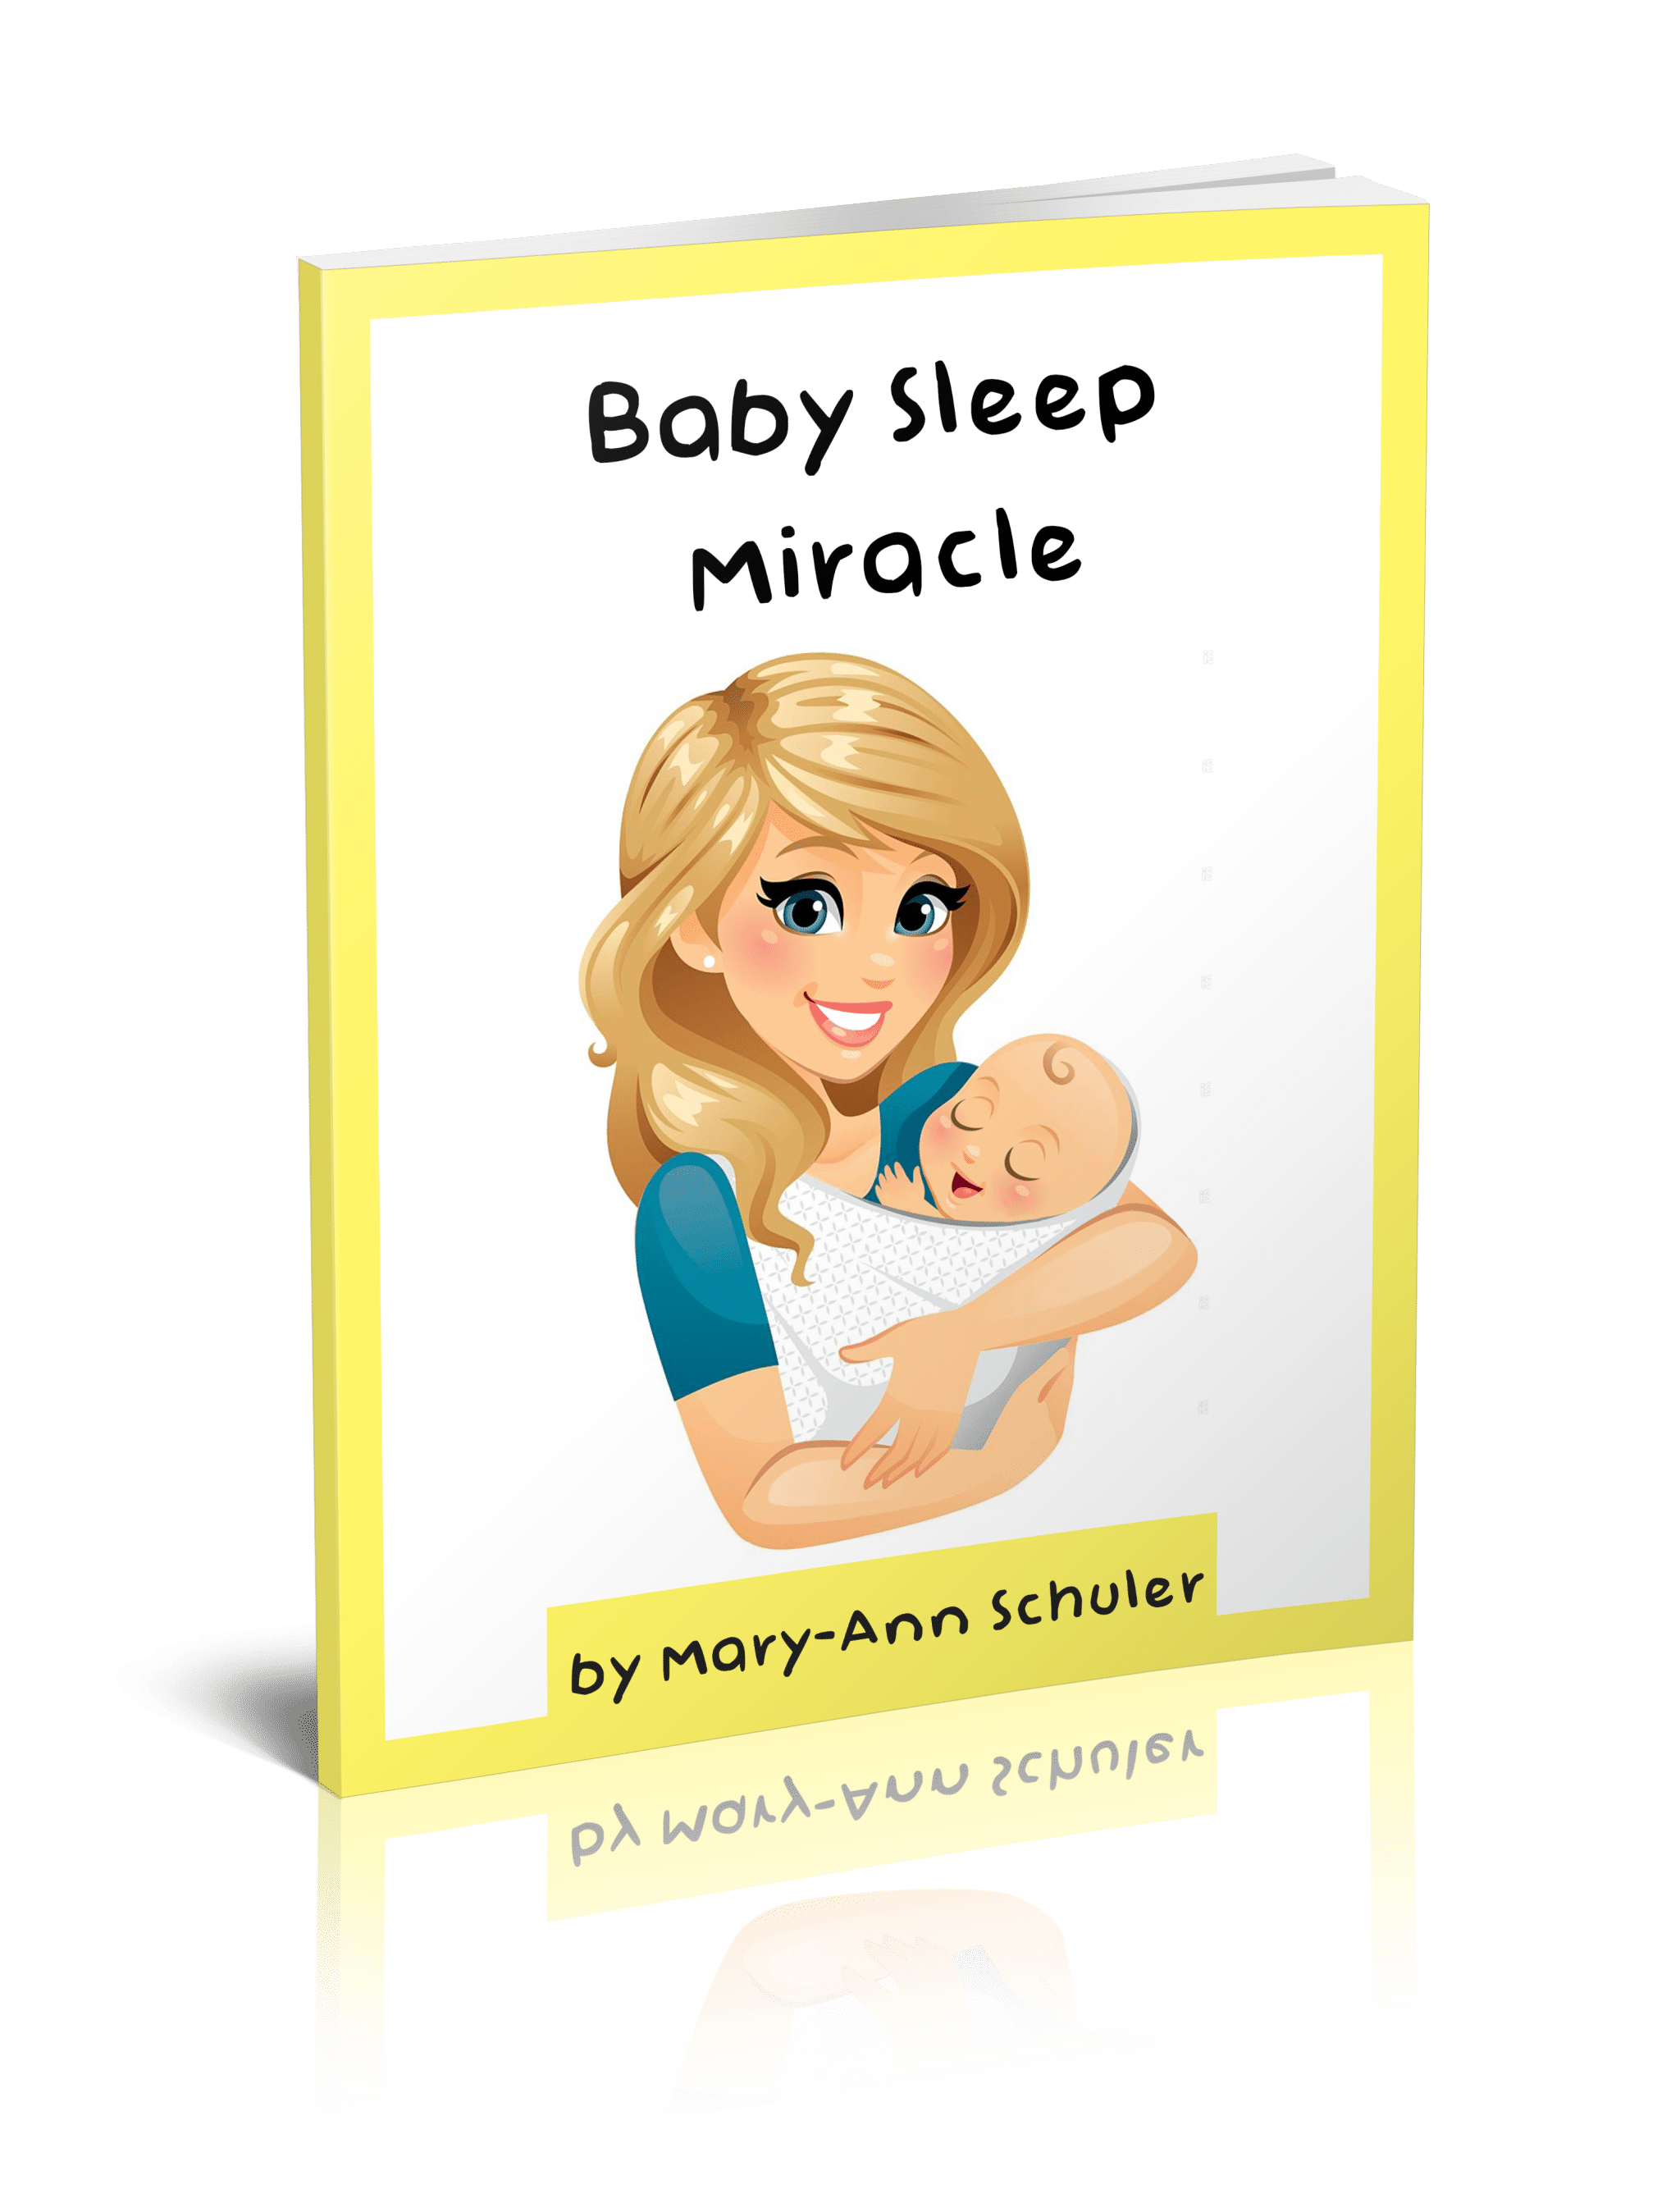 baby sleep miracle review